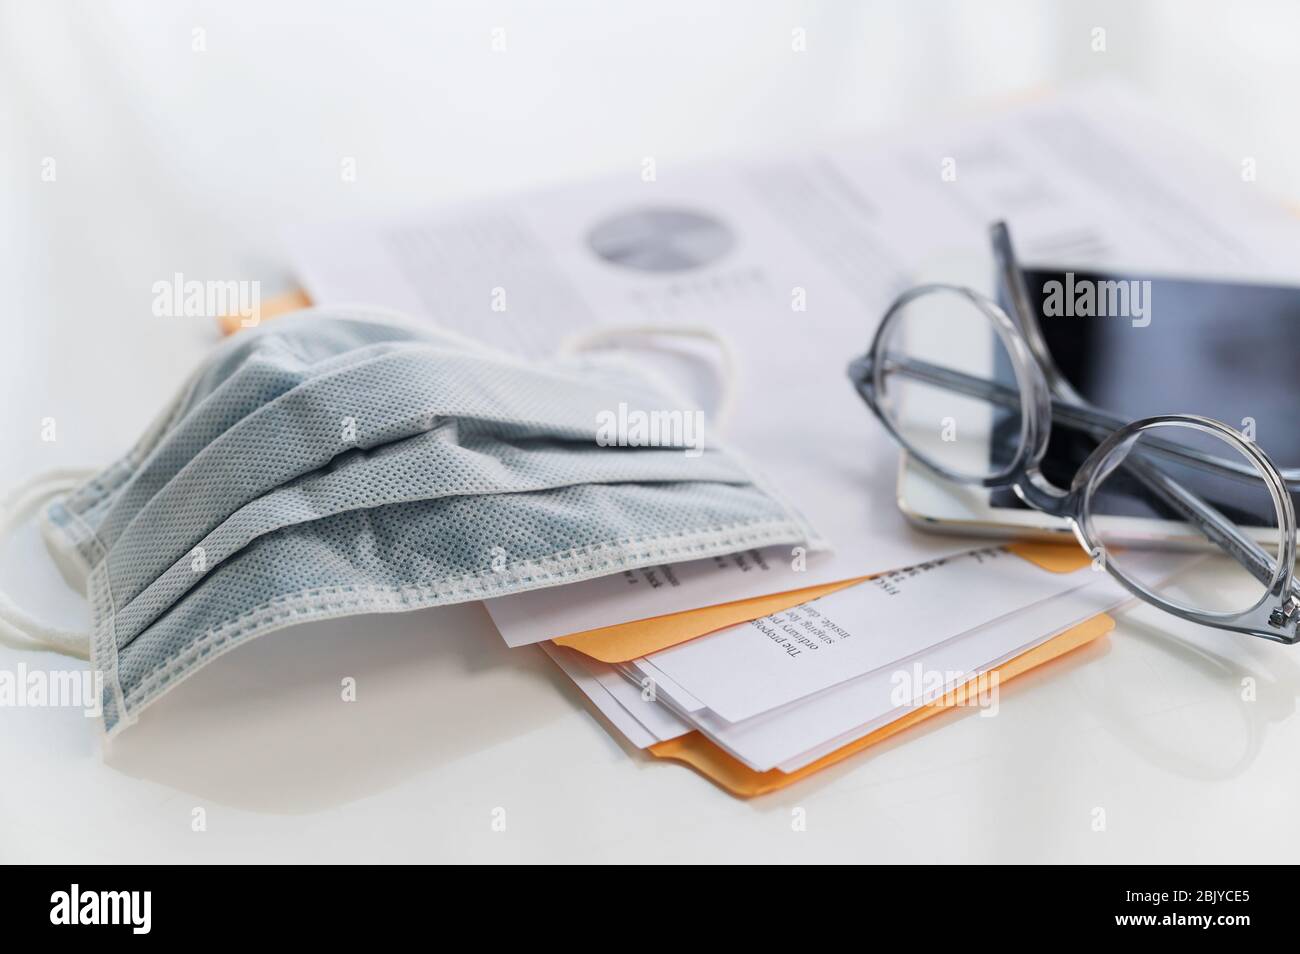 Face mask on business papers and tablet Stock Photo